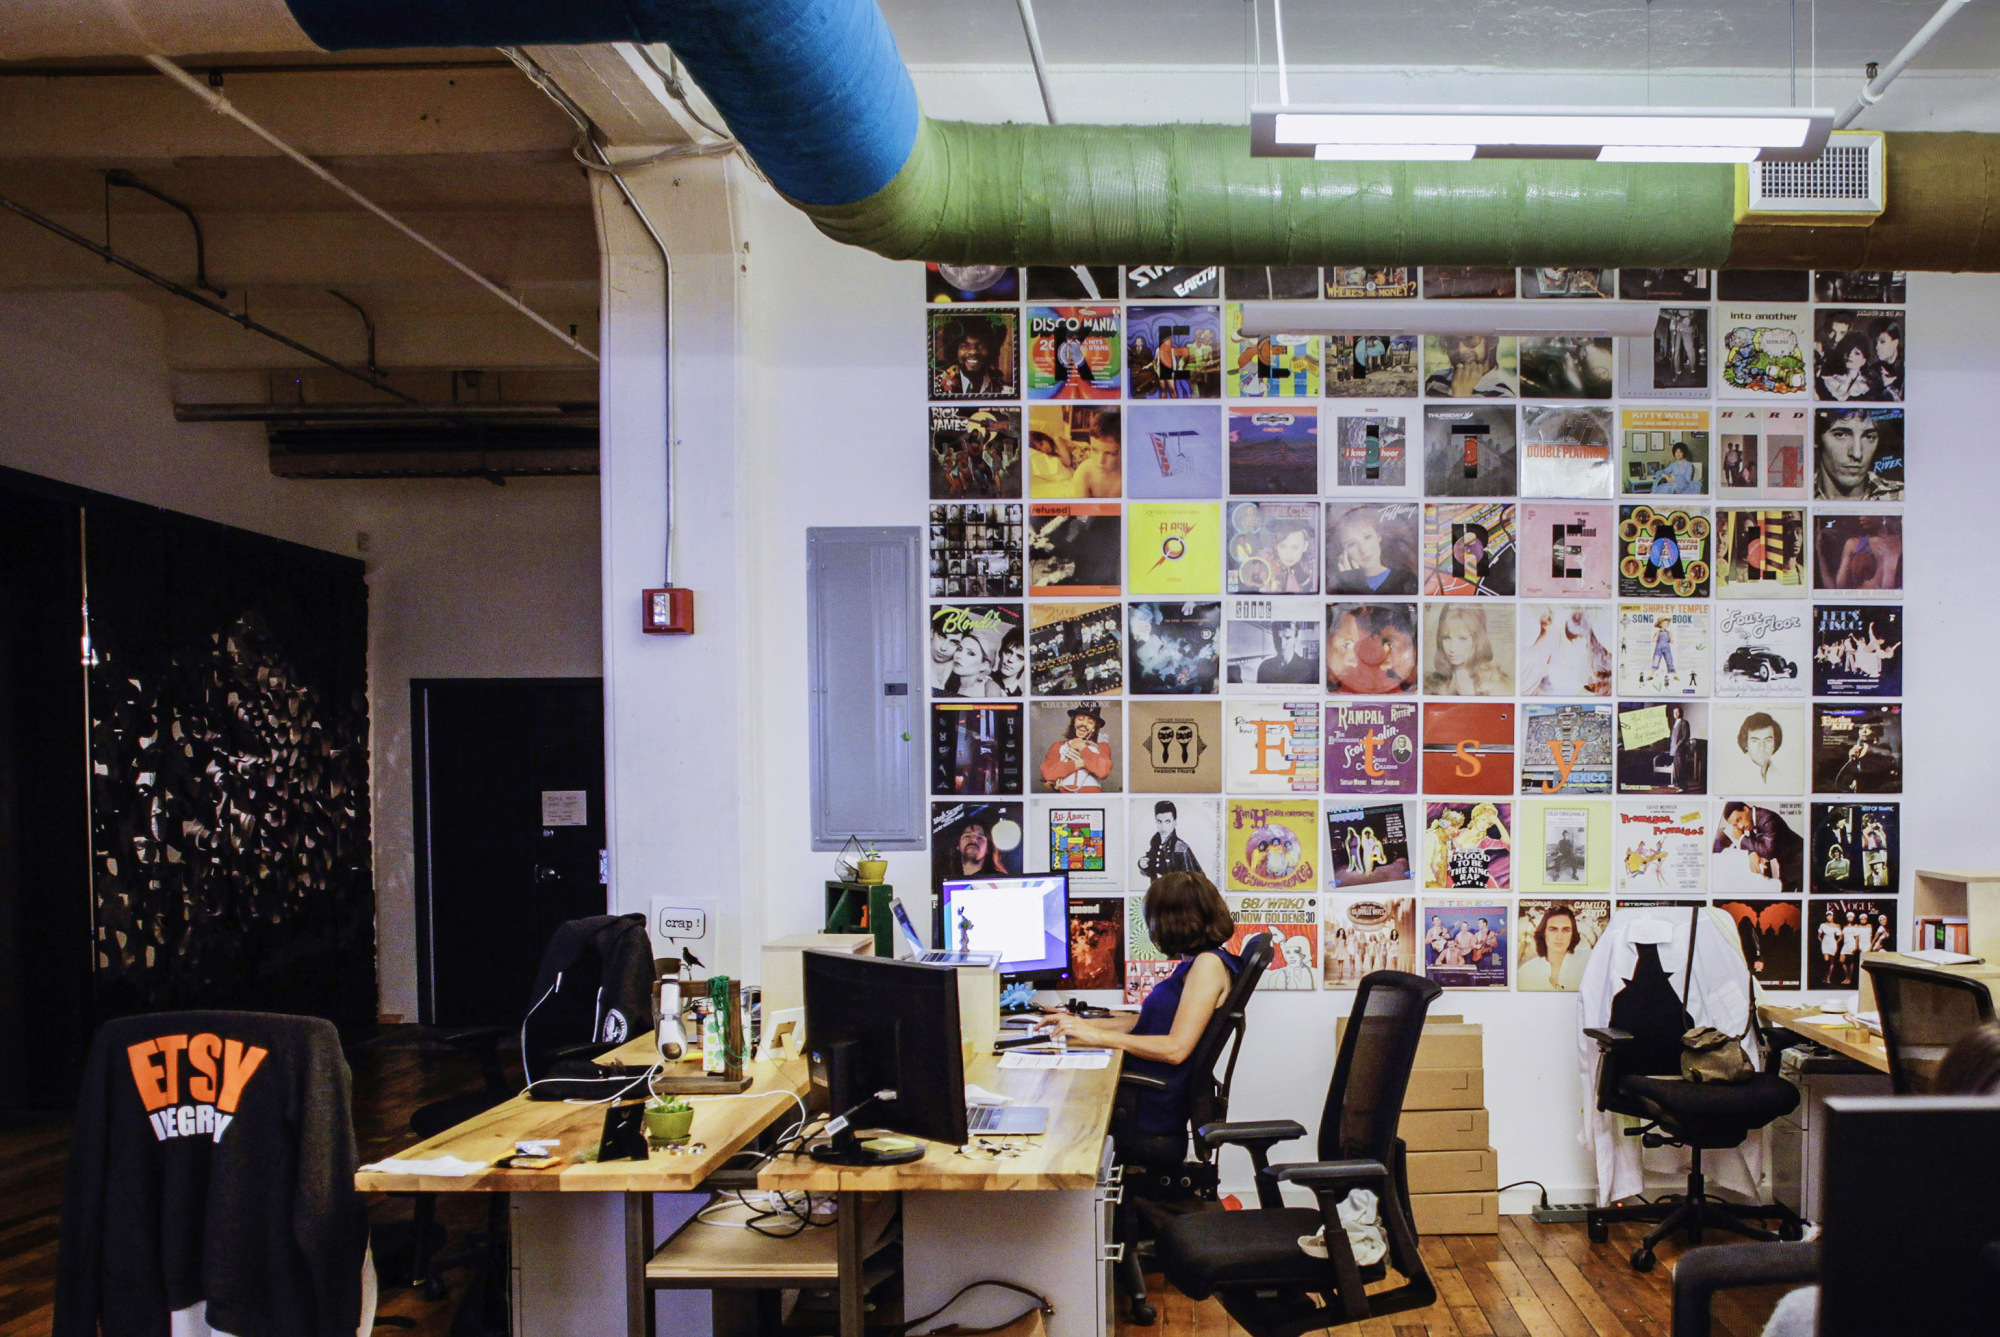 Employees work at Etsy Inc. headquarters in the Brooklyn borough of New York.